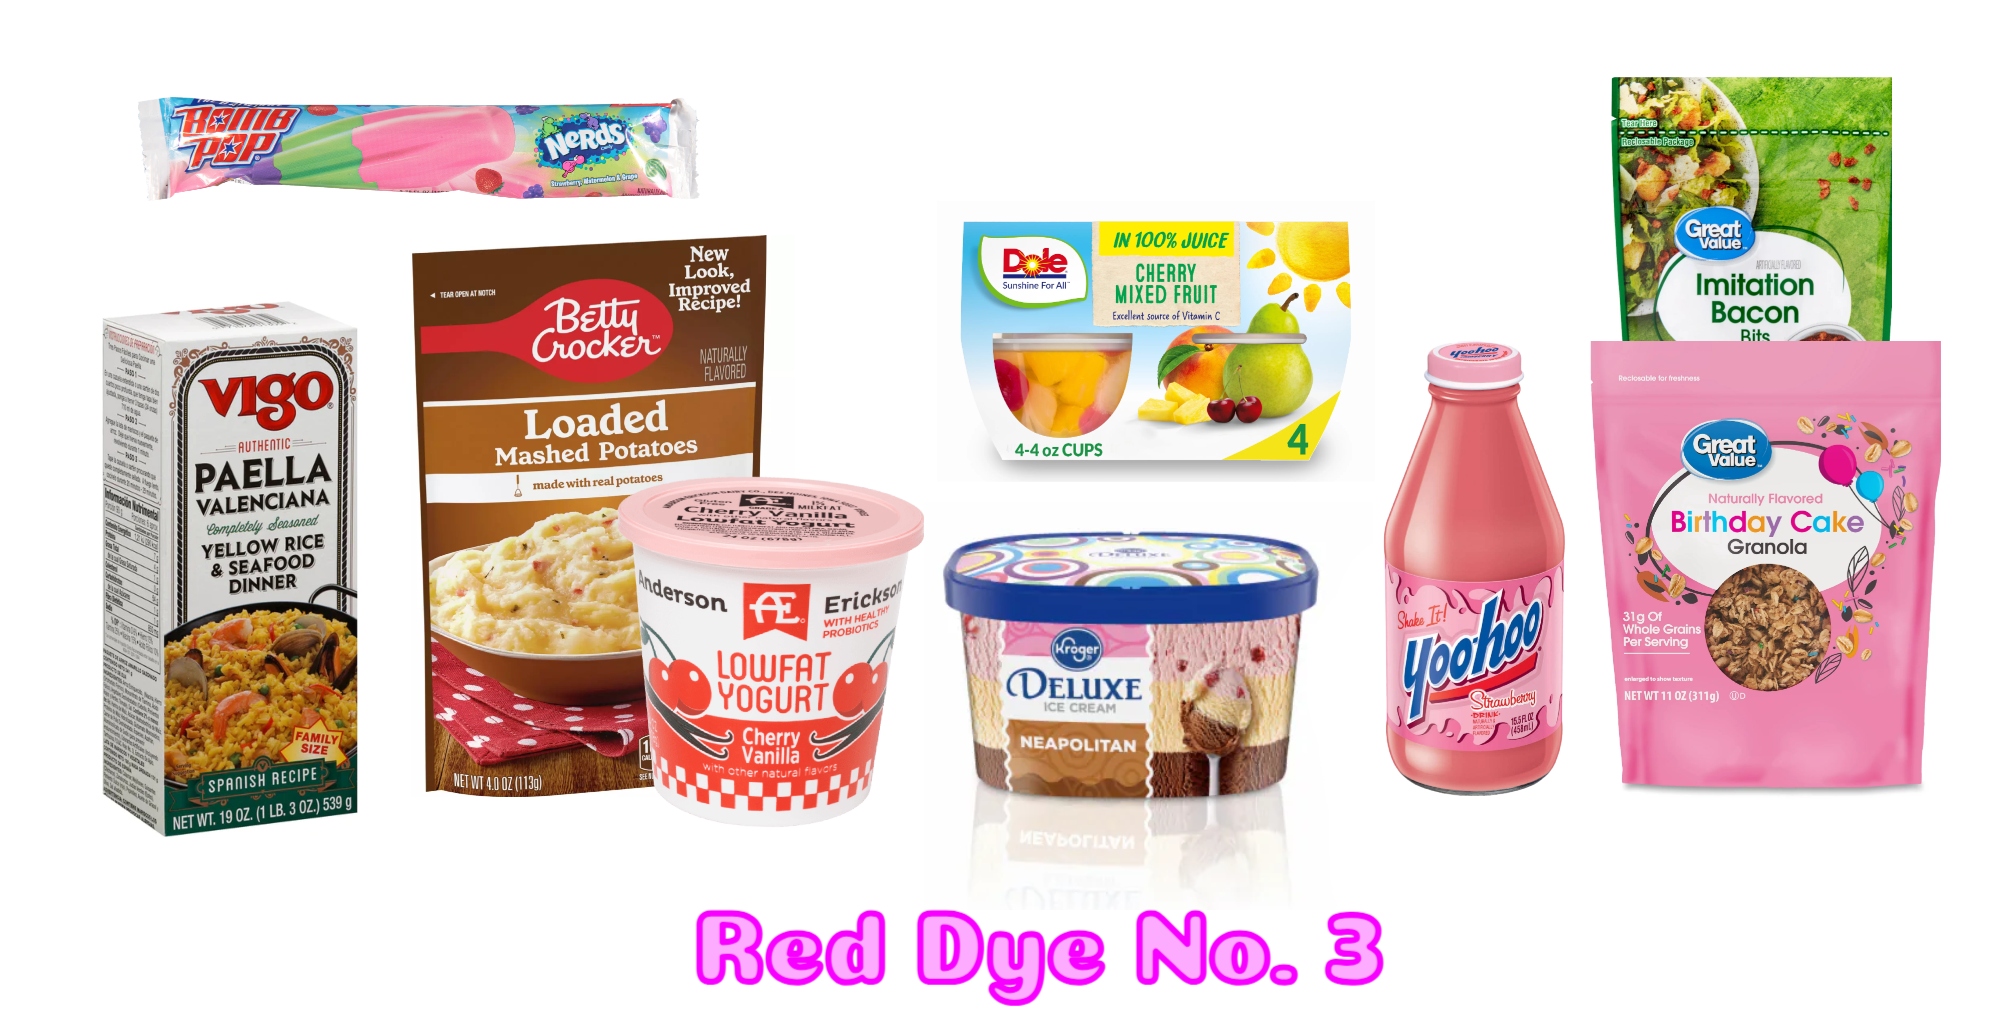 A collage we made featuring foods with Red Dye No. 3, including Great Value granola, Vigo paella, Dole fruit cups and more